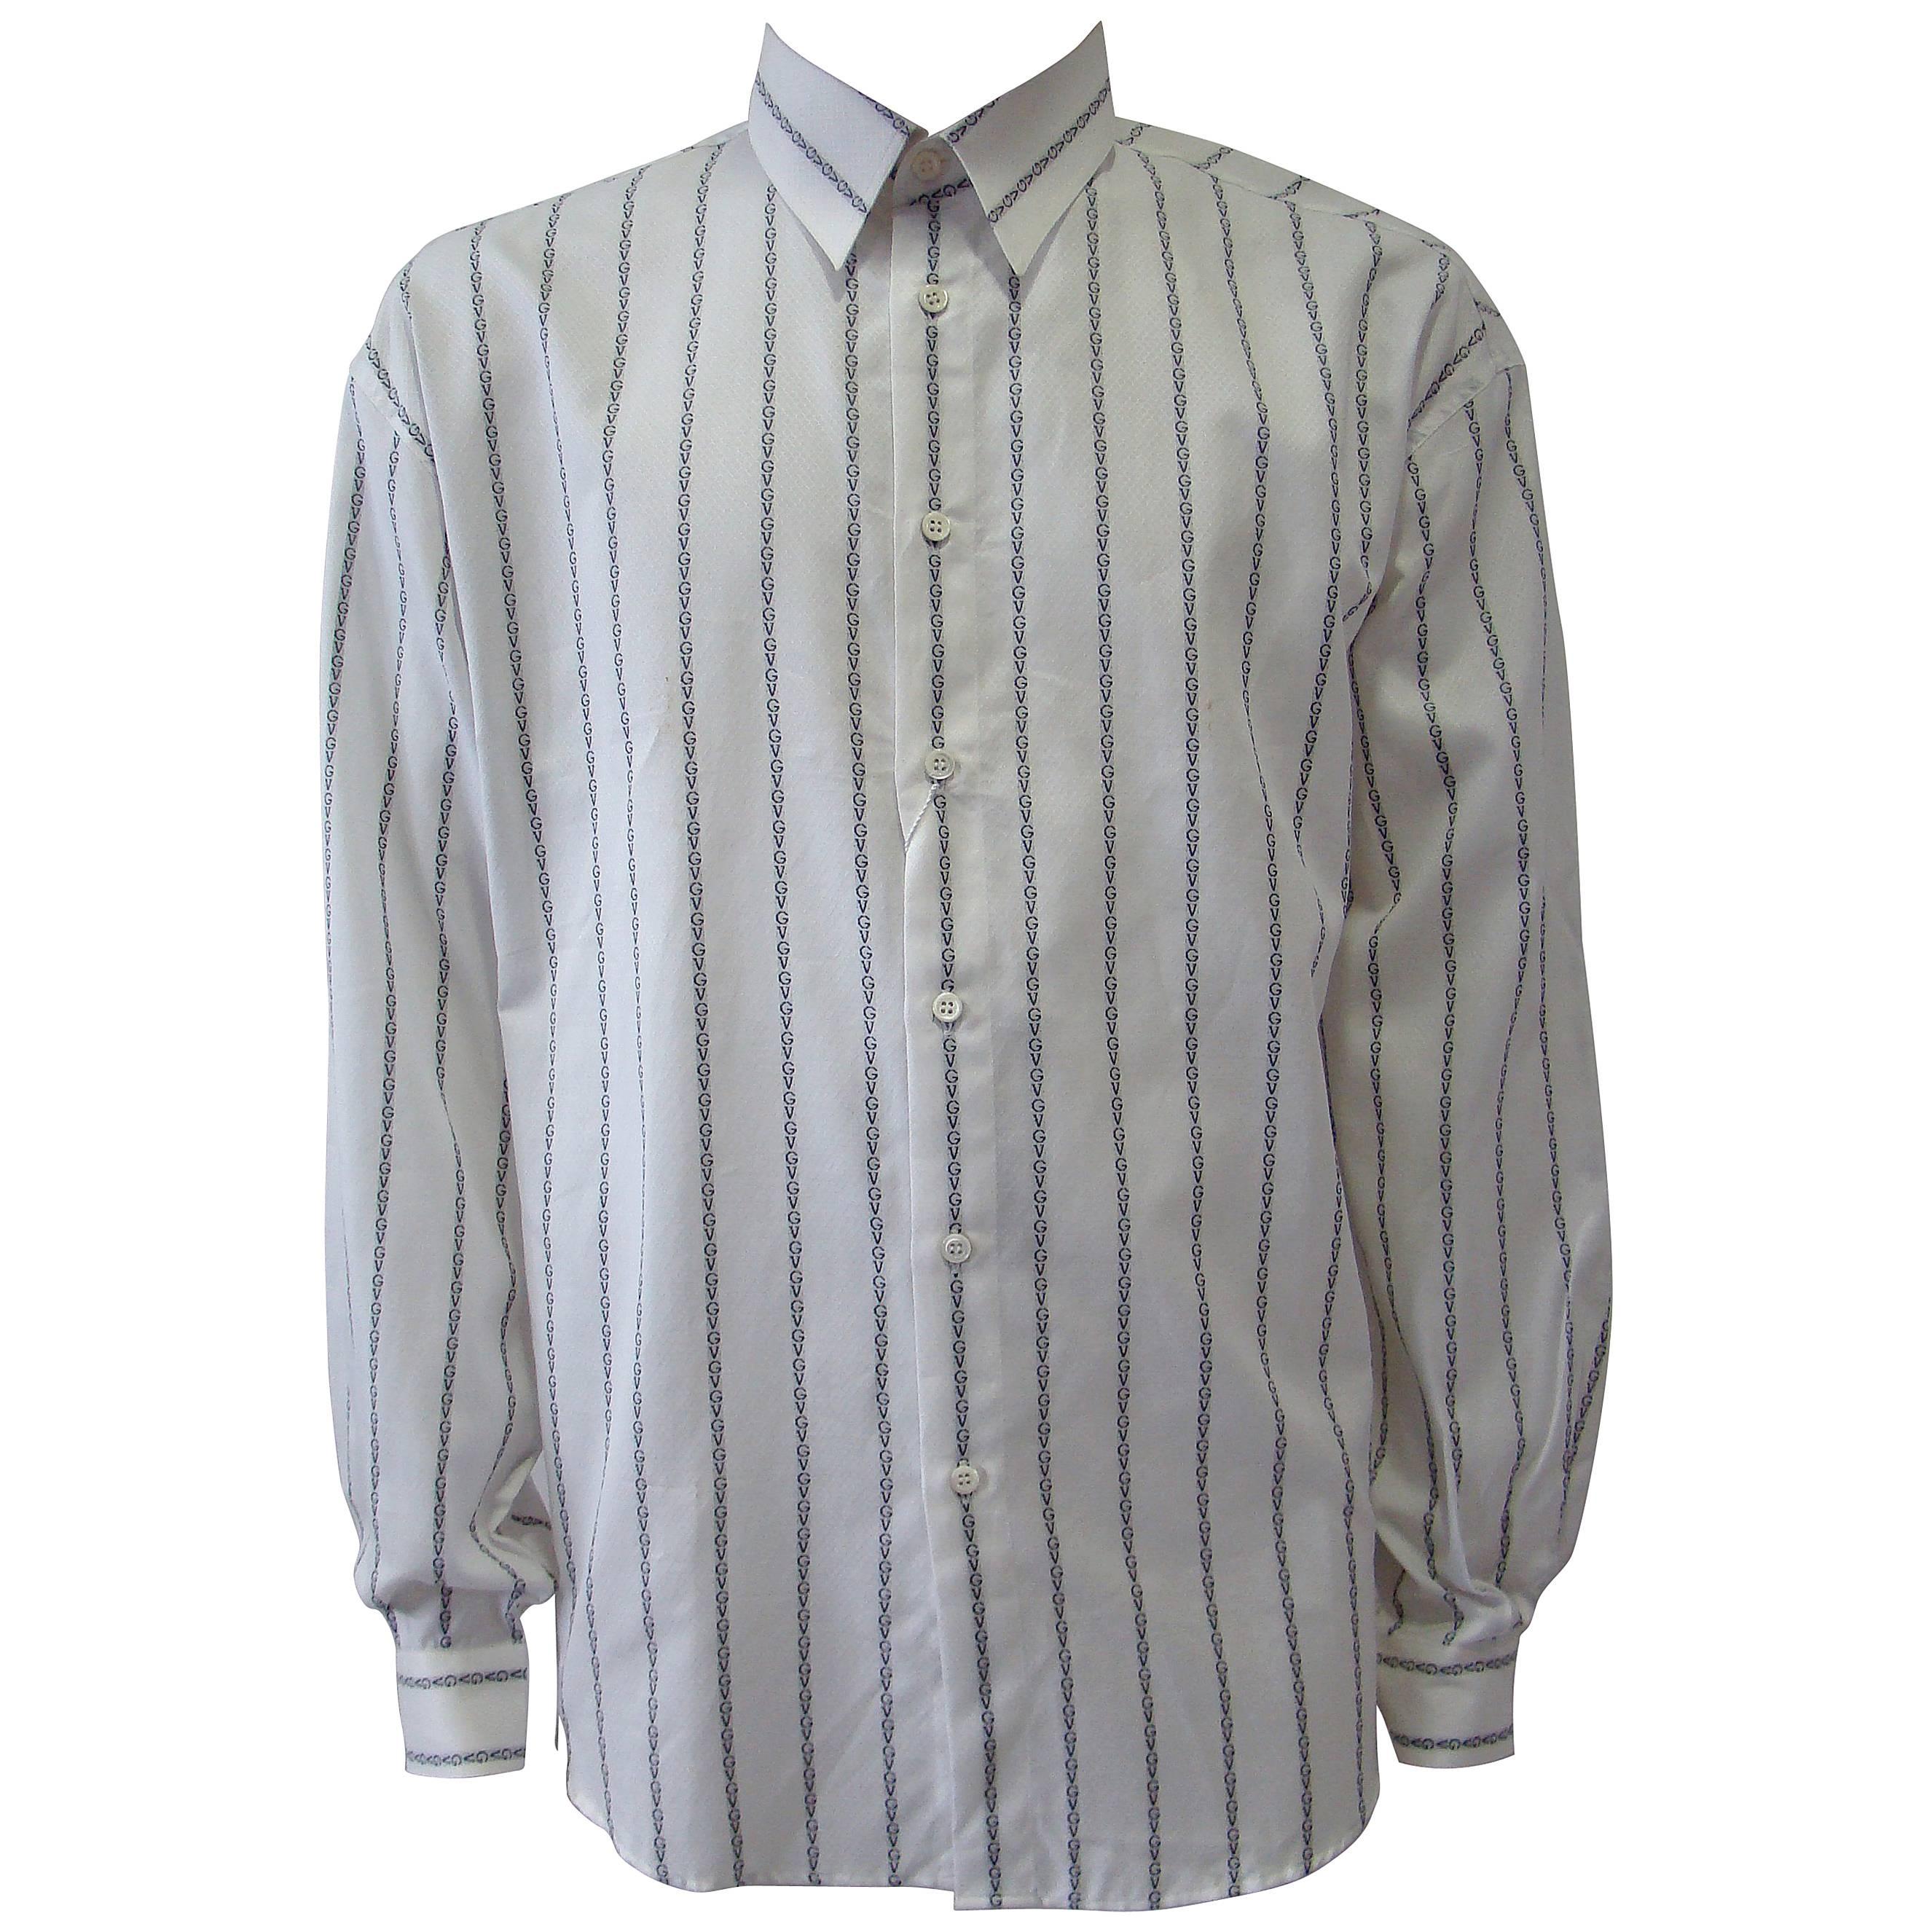 Gianni Versace Striped With Initials Printed Shirt For Sale